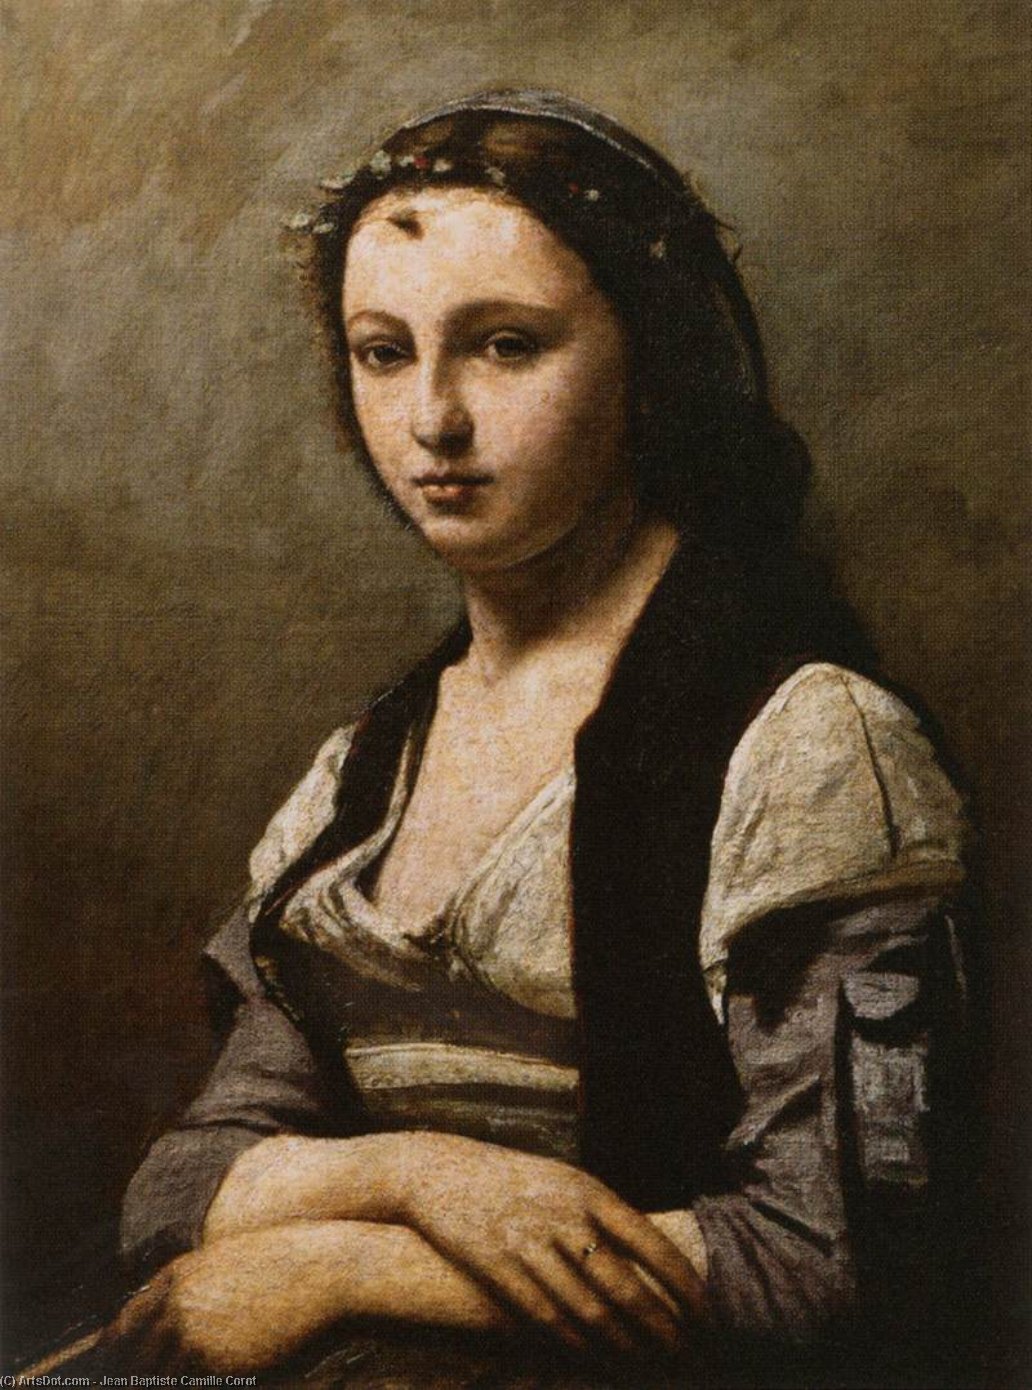 WikiOO.org - 백과 사전 - 회화, 삽화 Jean Baptiste Camille Corot - The Woman with the Pearl